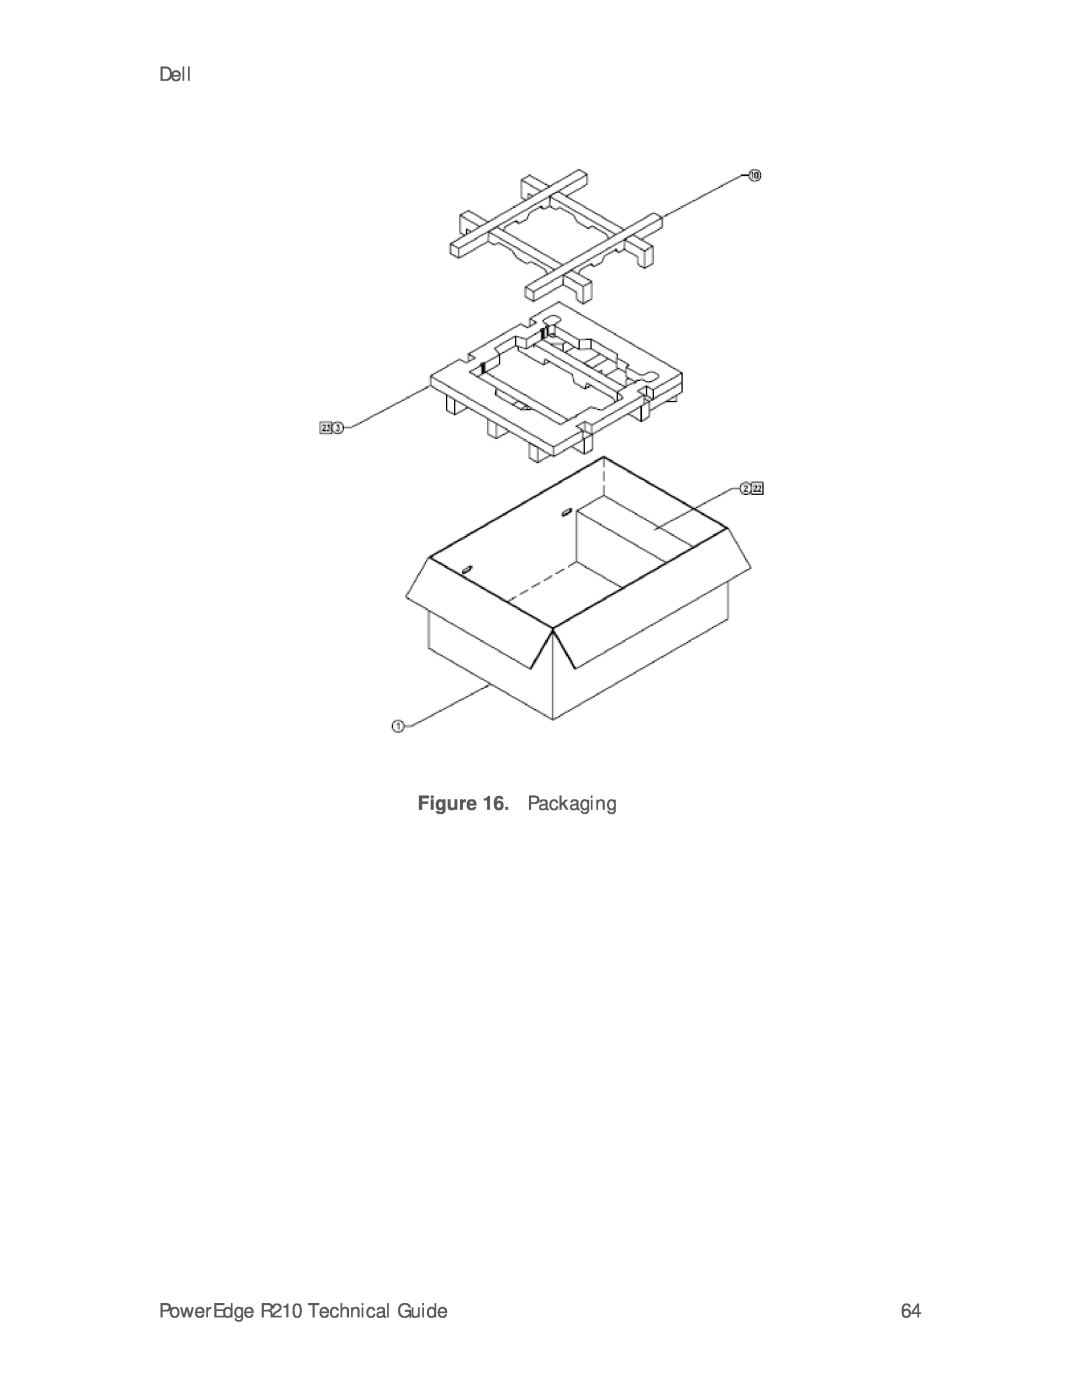 Dell manual Packaging, Dell, PowerEdge R210 Technical Guide 